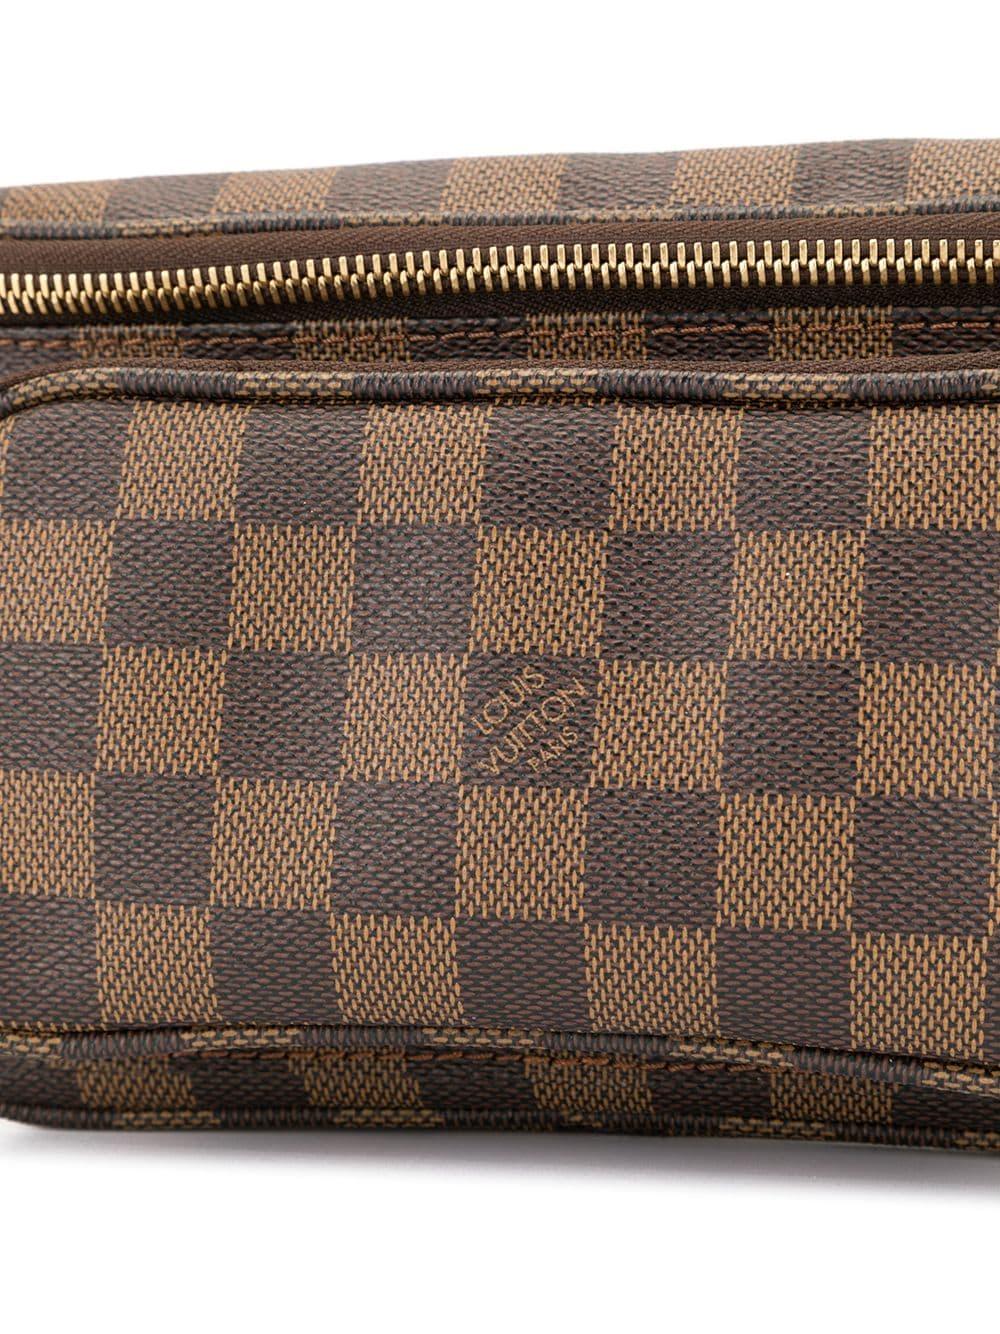 Dark Brown Braided Leather Bum Bag with LV – Emma Lou's Boutique